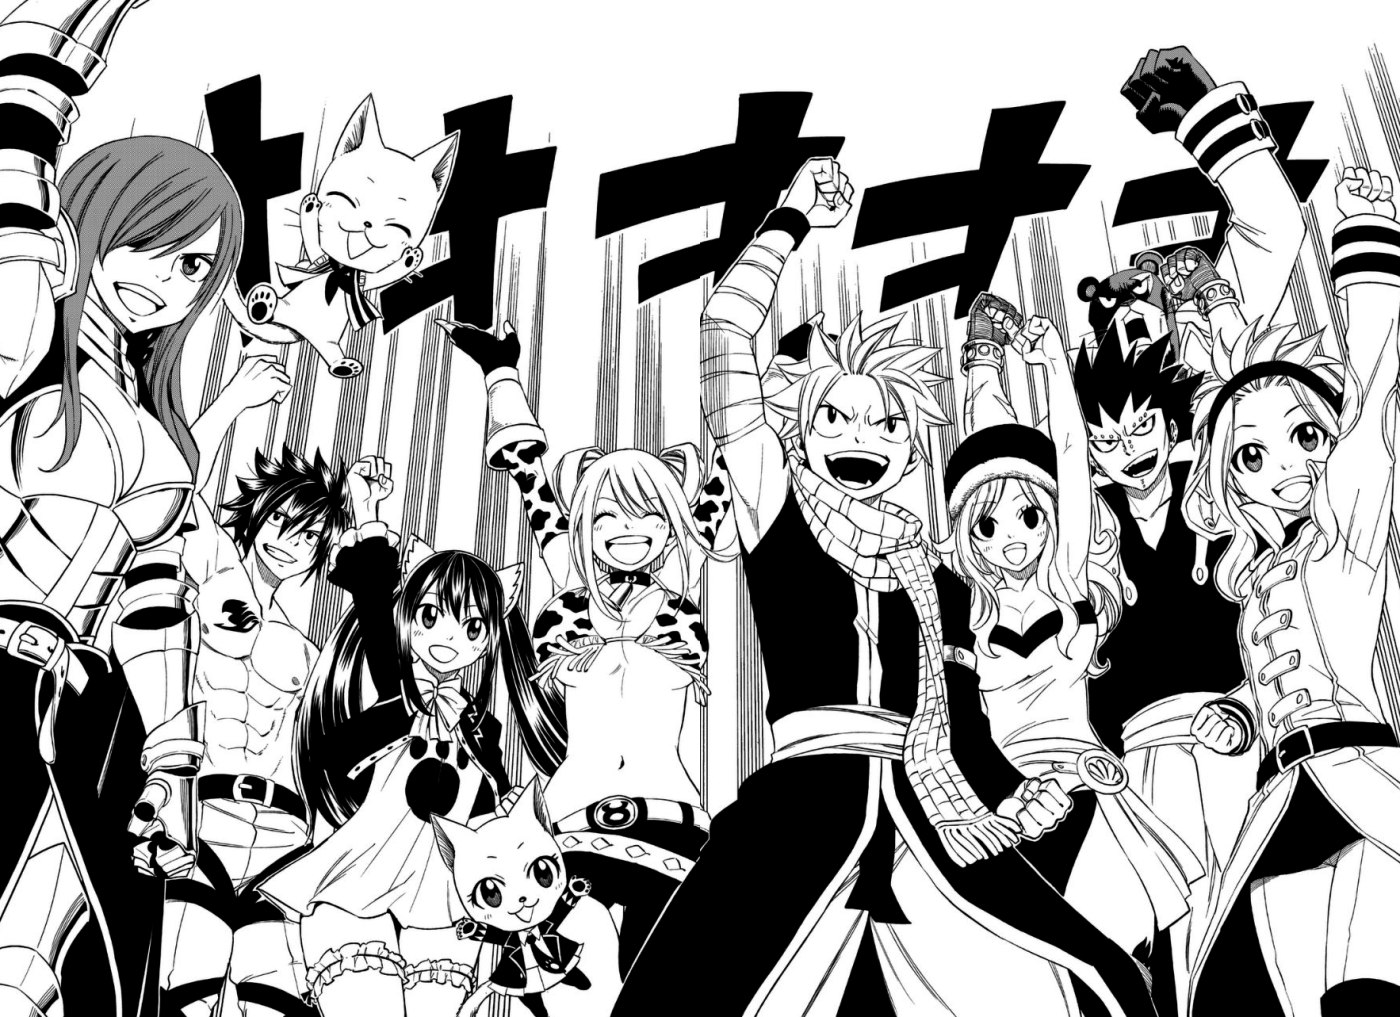 Fairy Tail Manga Review – Legend of the Golden Wind